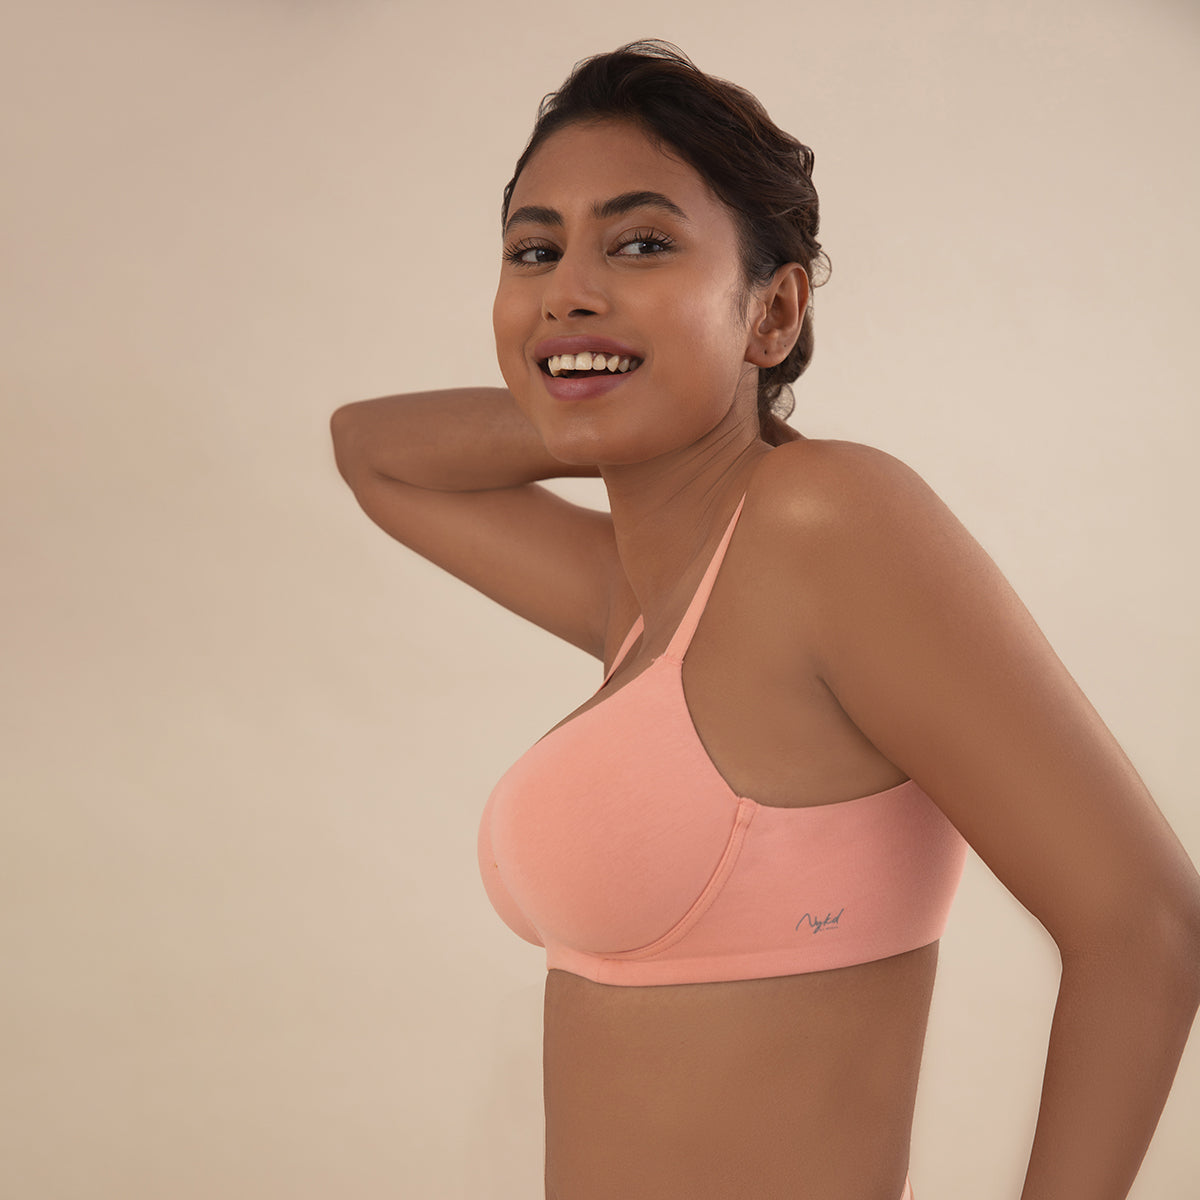 Nykd by Nykaa Cups of Joy Wire-free Shaping Bra - M Blue NYB094